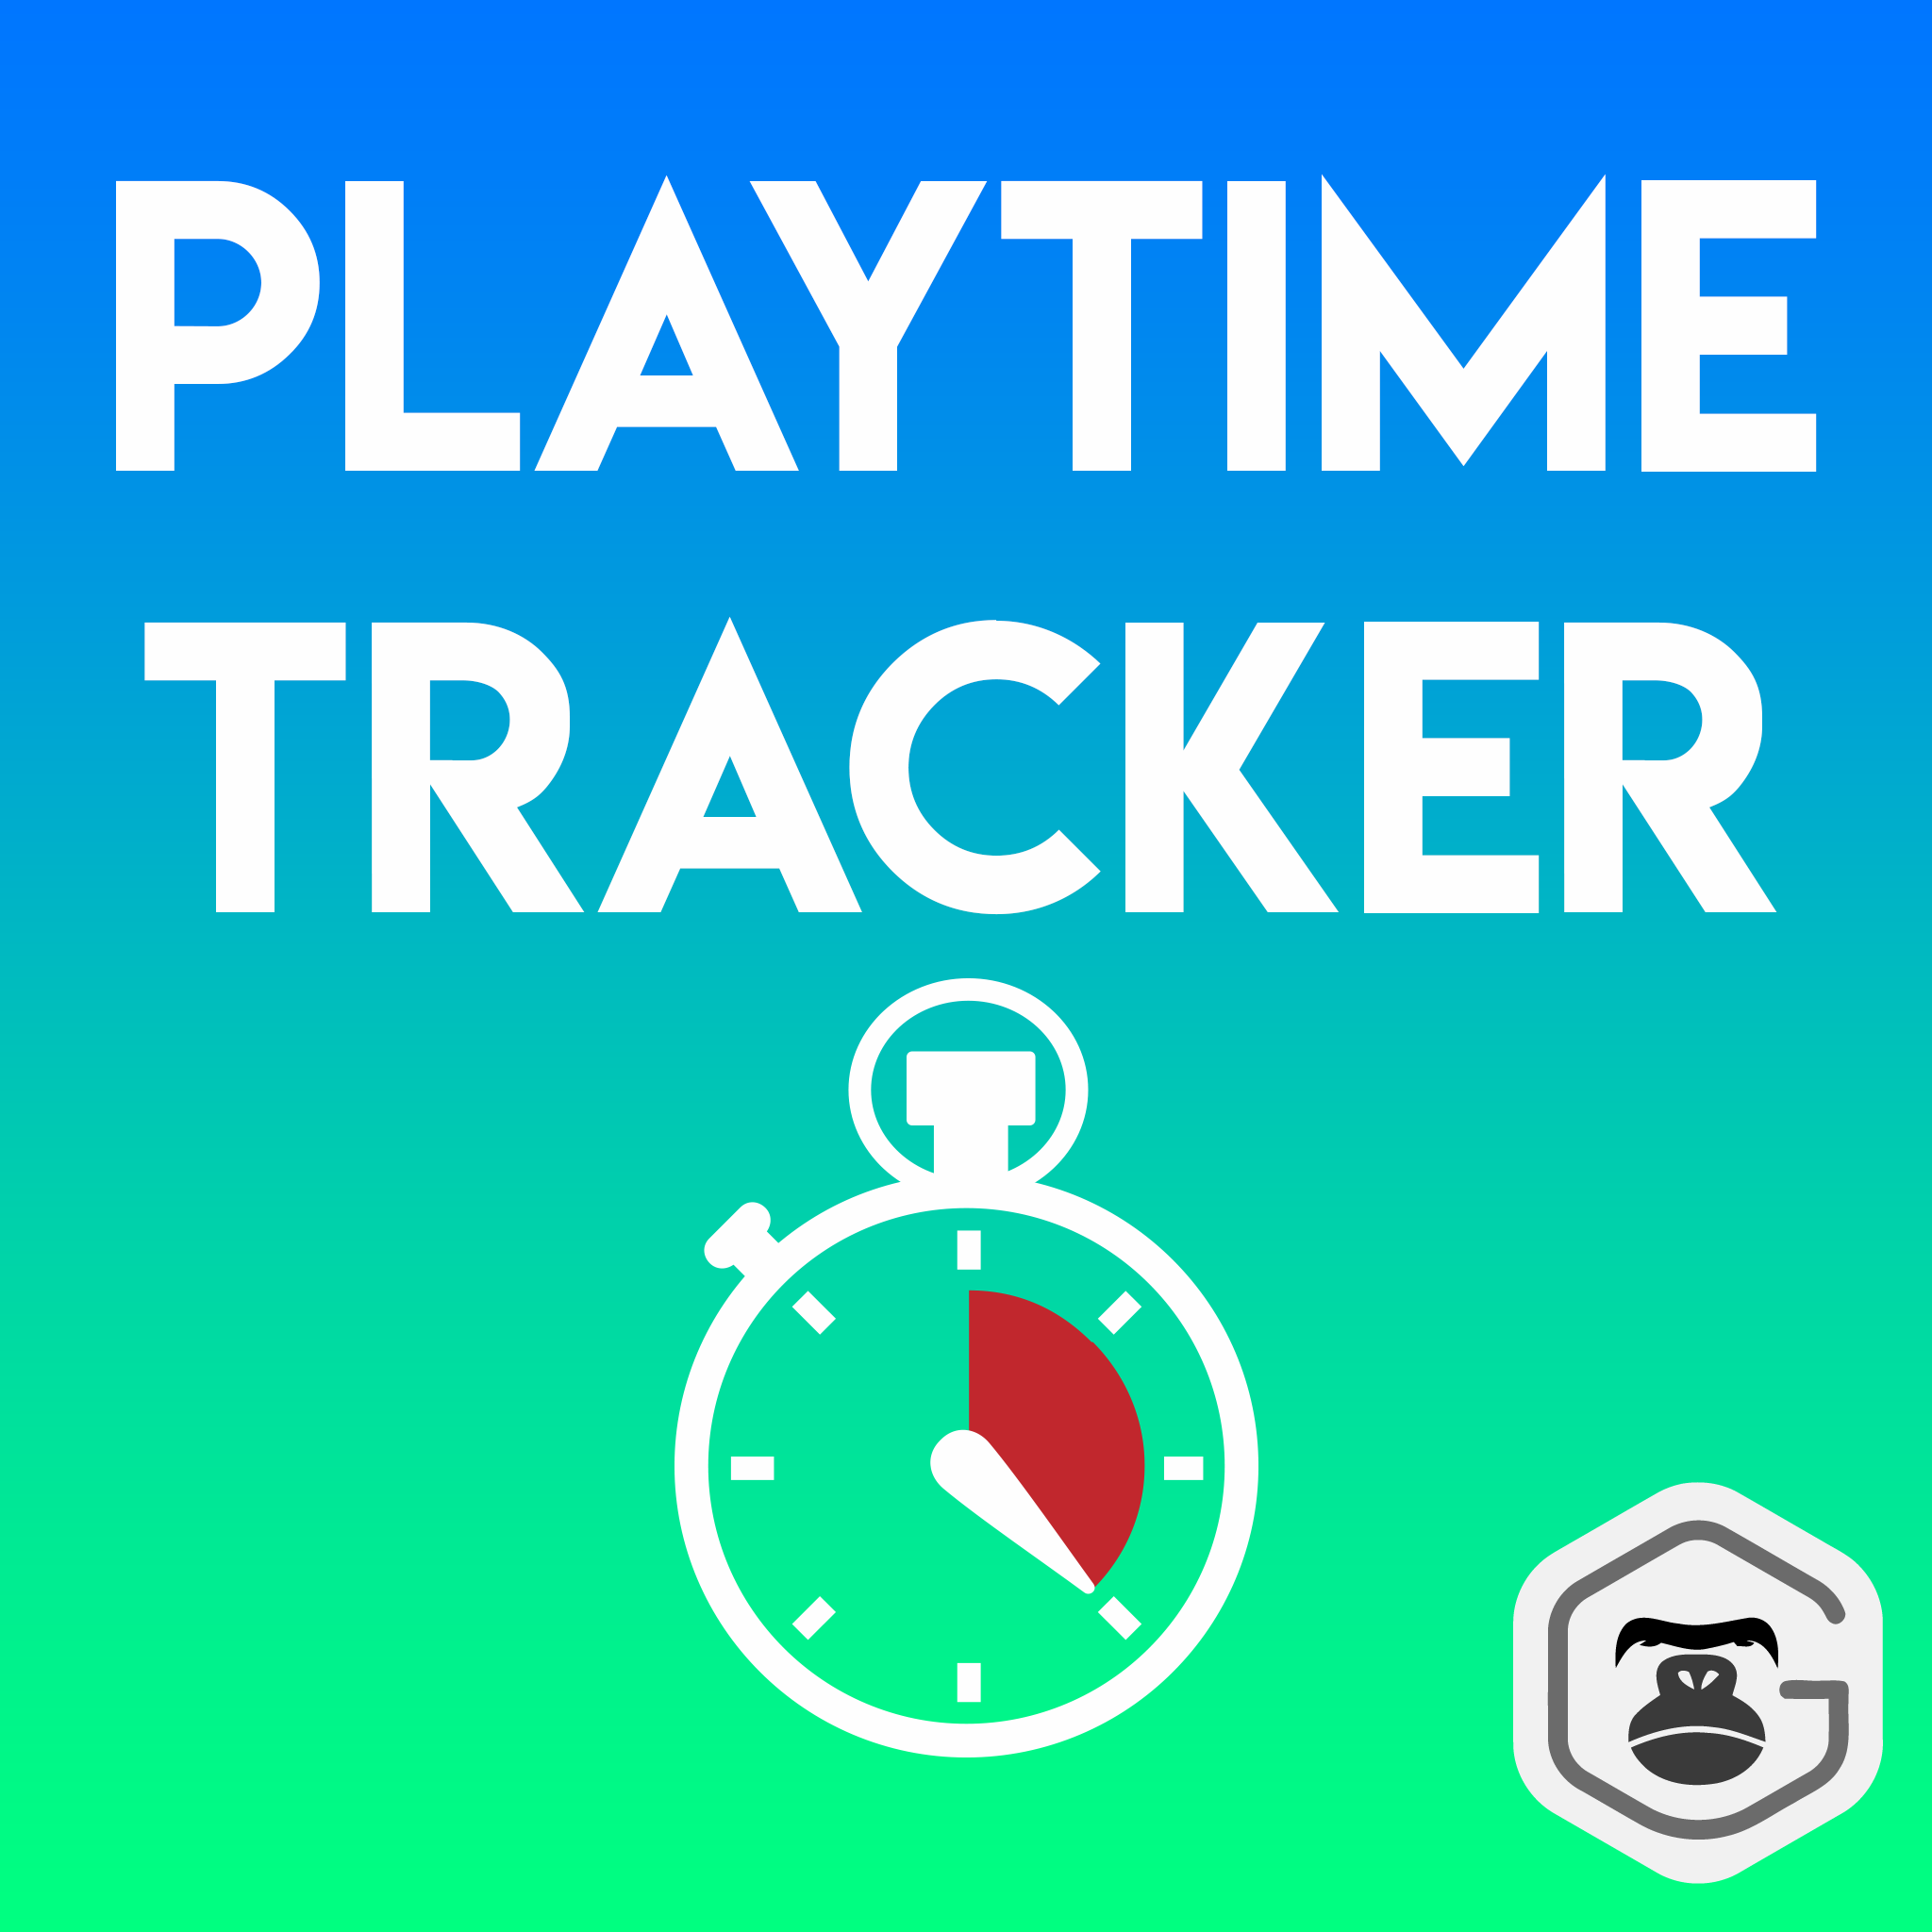 More information about "Playtime Tracker"